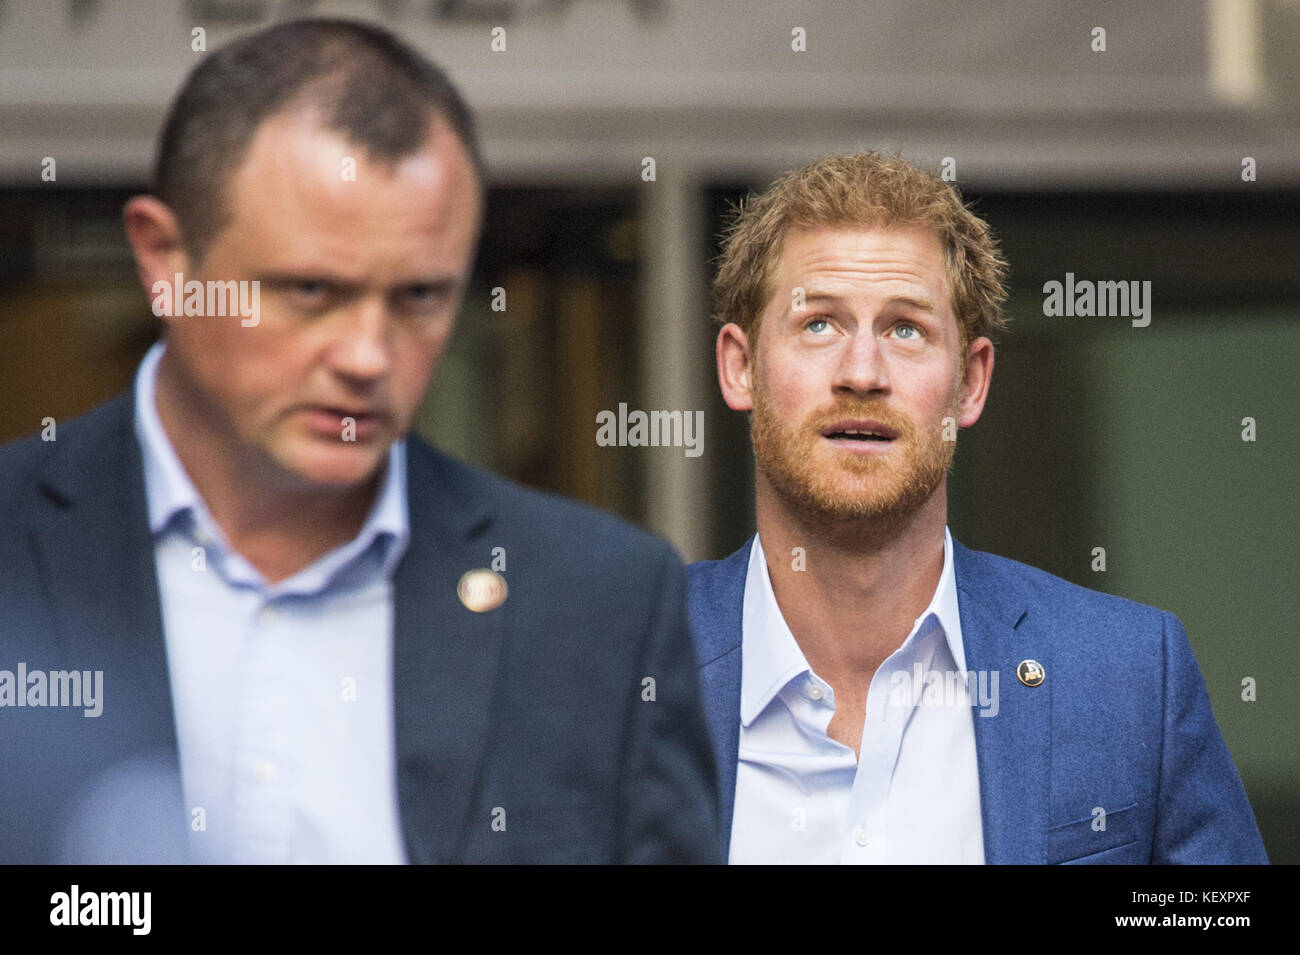 Prince Harry leaves the True Patriot Love Symposium, at the Scotia Plaza in Toronto.  Featuring: Prince Harry Where: Toronto, Canada When: 22 Sep 2017 Credit: Euan Cherry/WENN.com Stock Photo